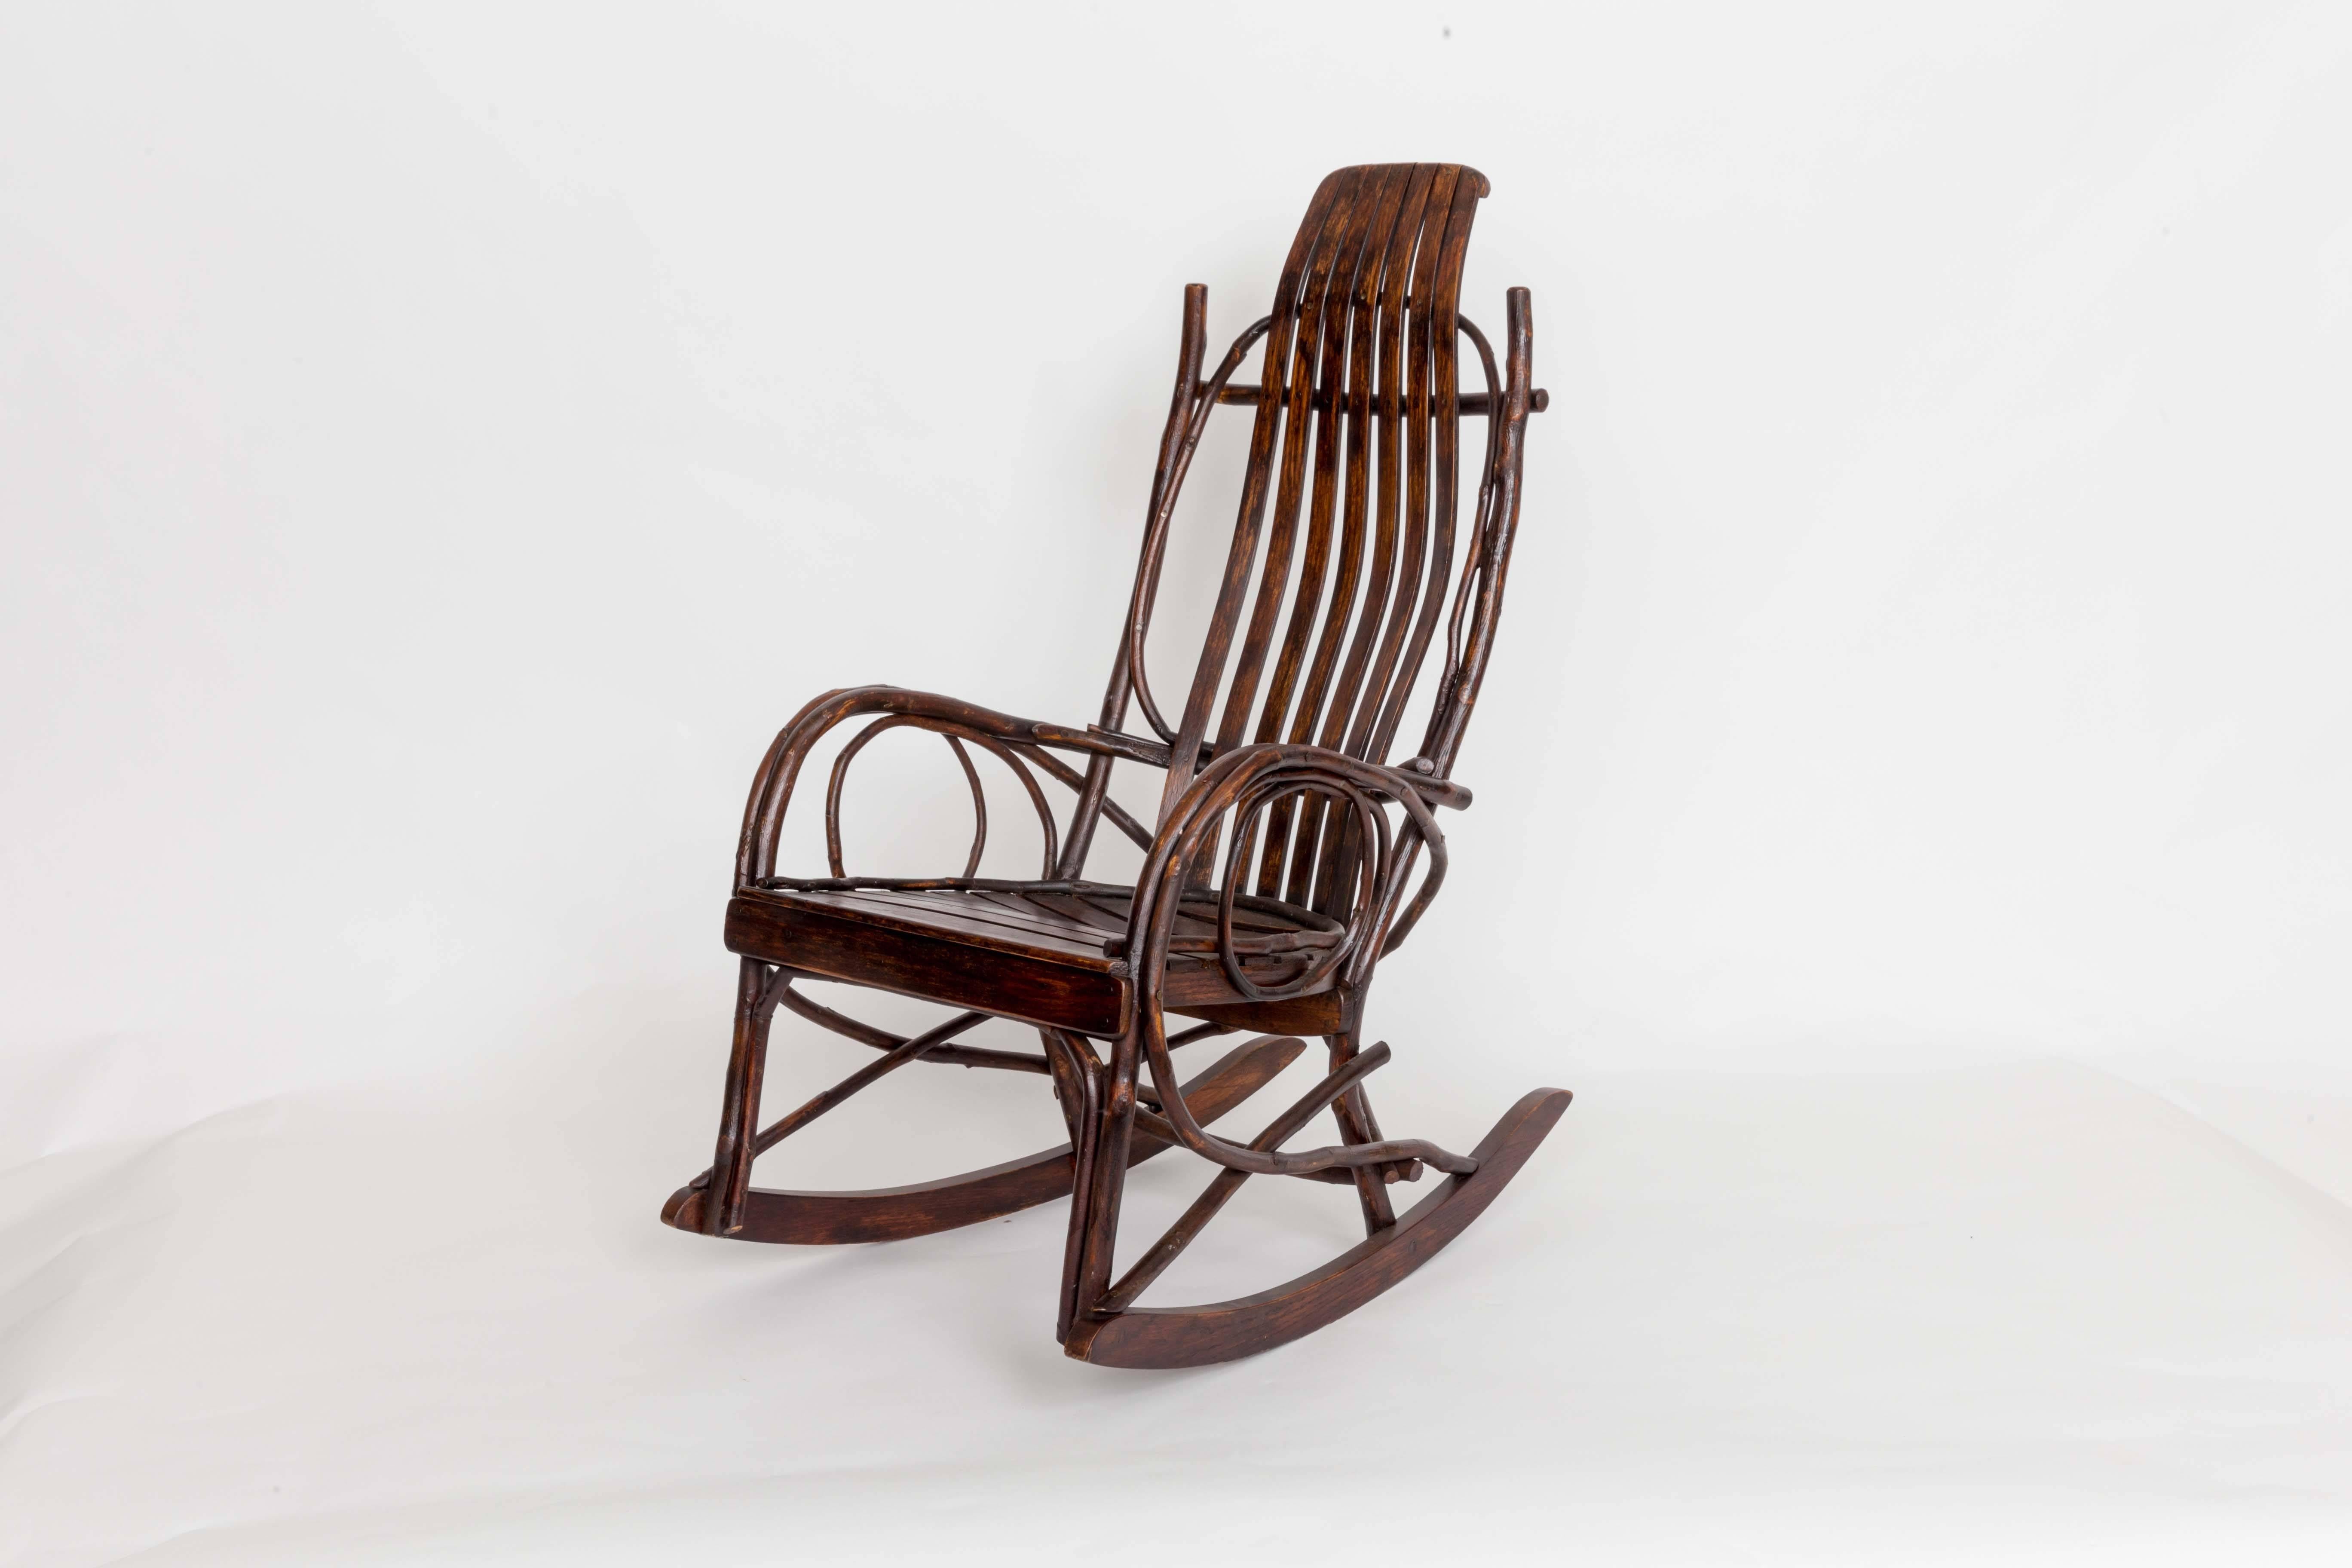 Early 20th-century Adirondack Childs rocking chair.